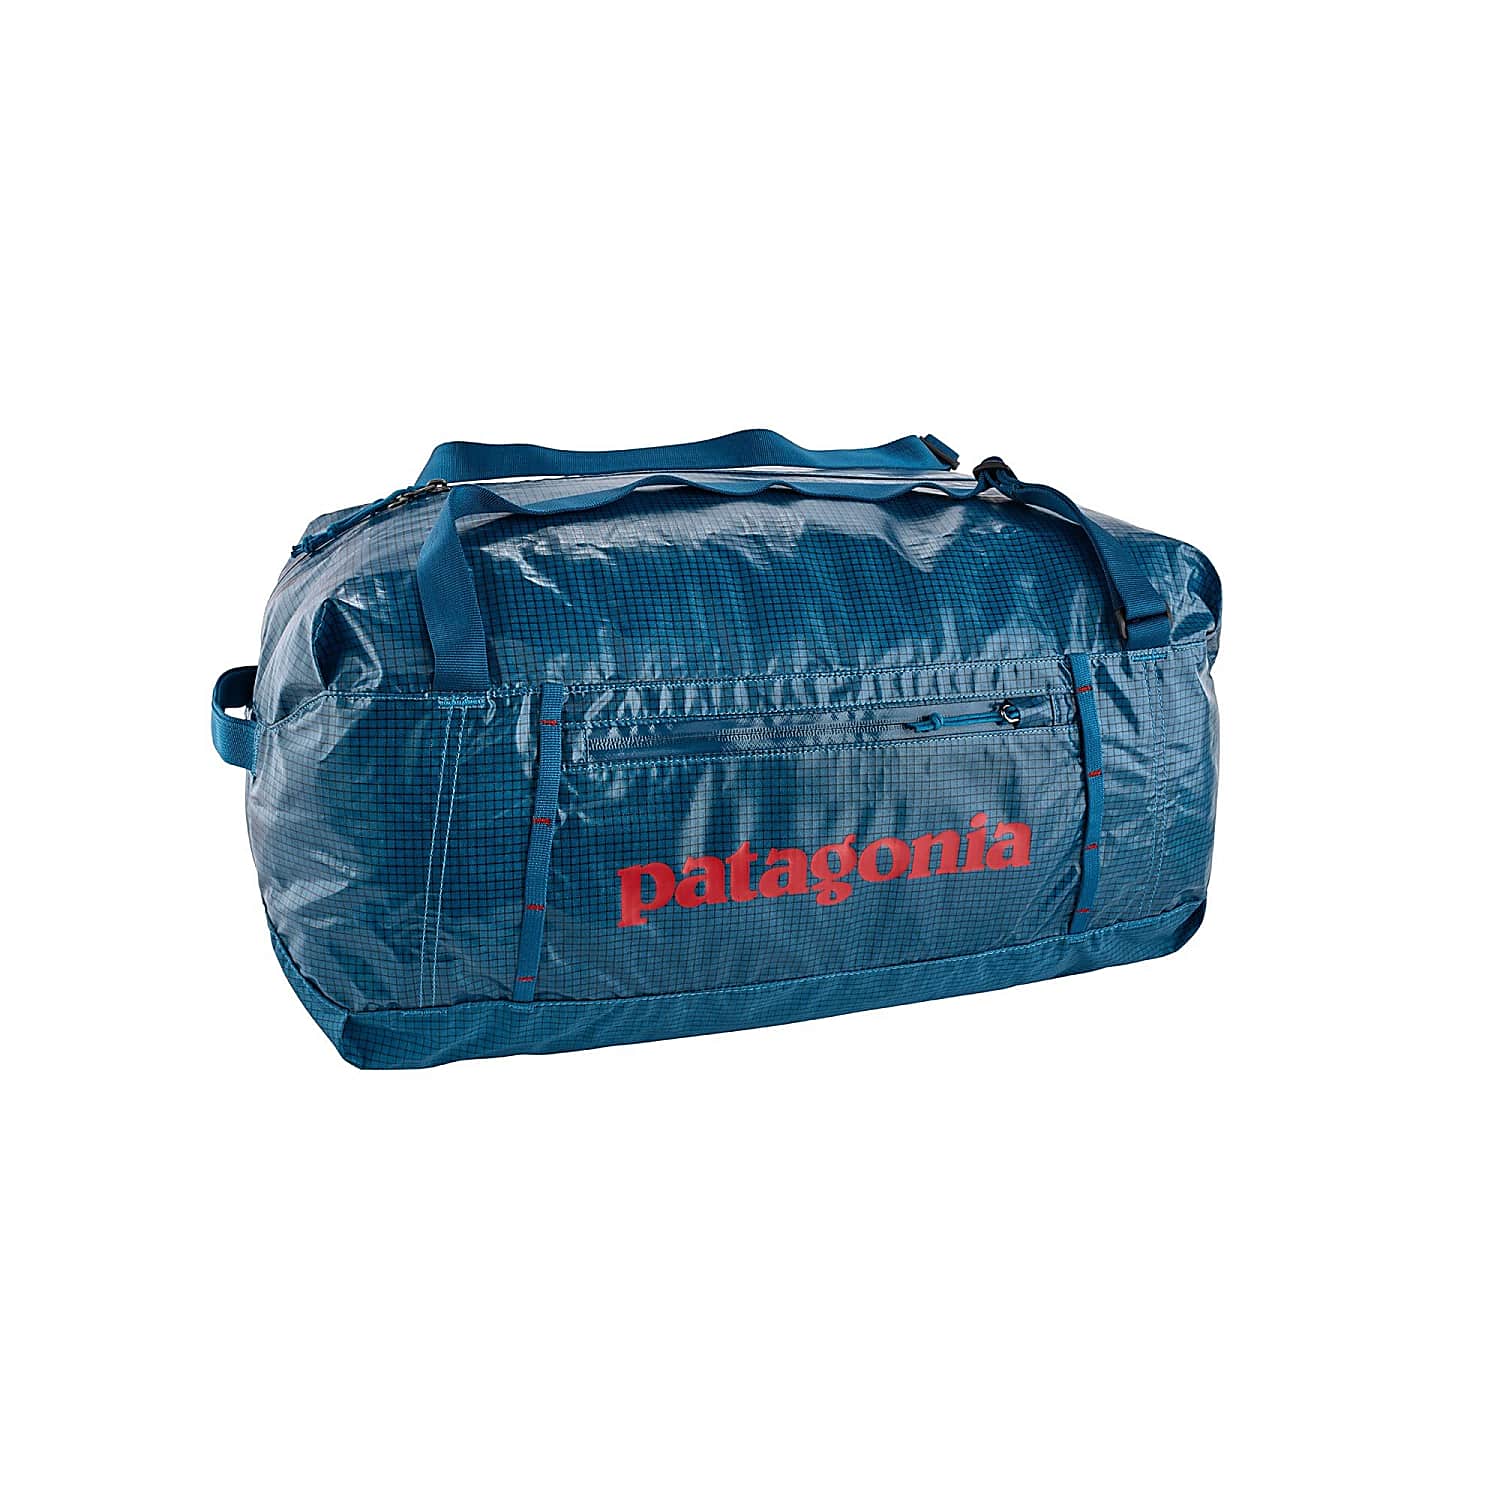 Patagonia LIGHTWEIGHT BLACK HOLE DUFFEL 30L, Balkan Blue - Fast and shipping - www.exxpozed.com